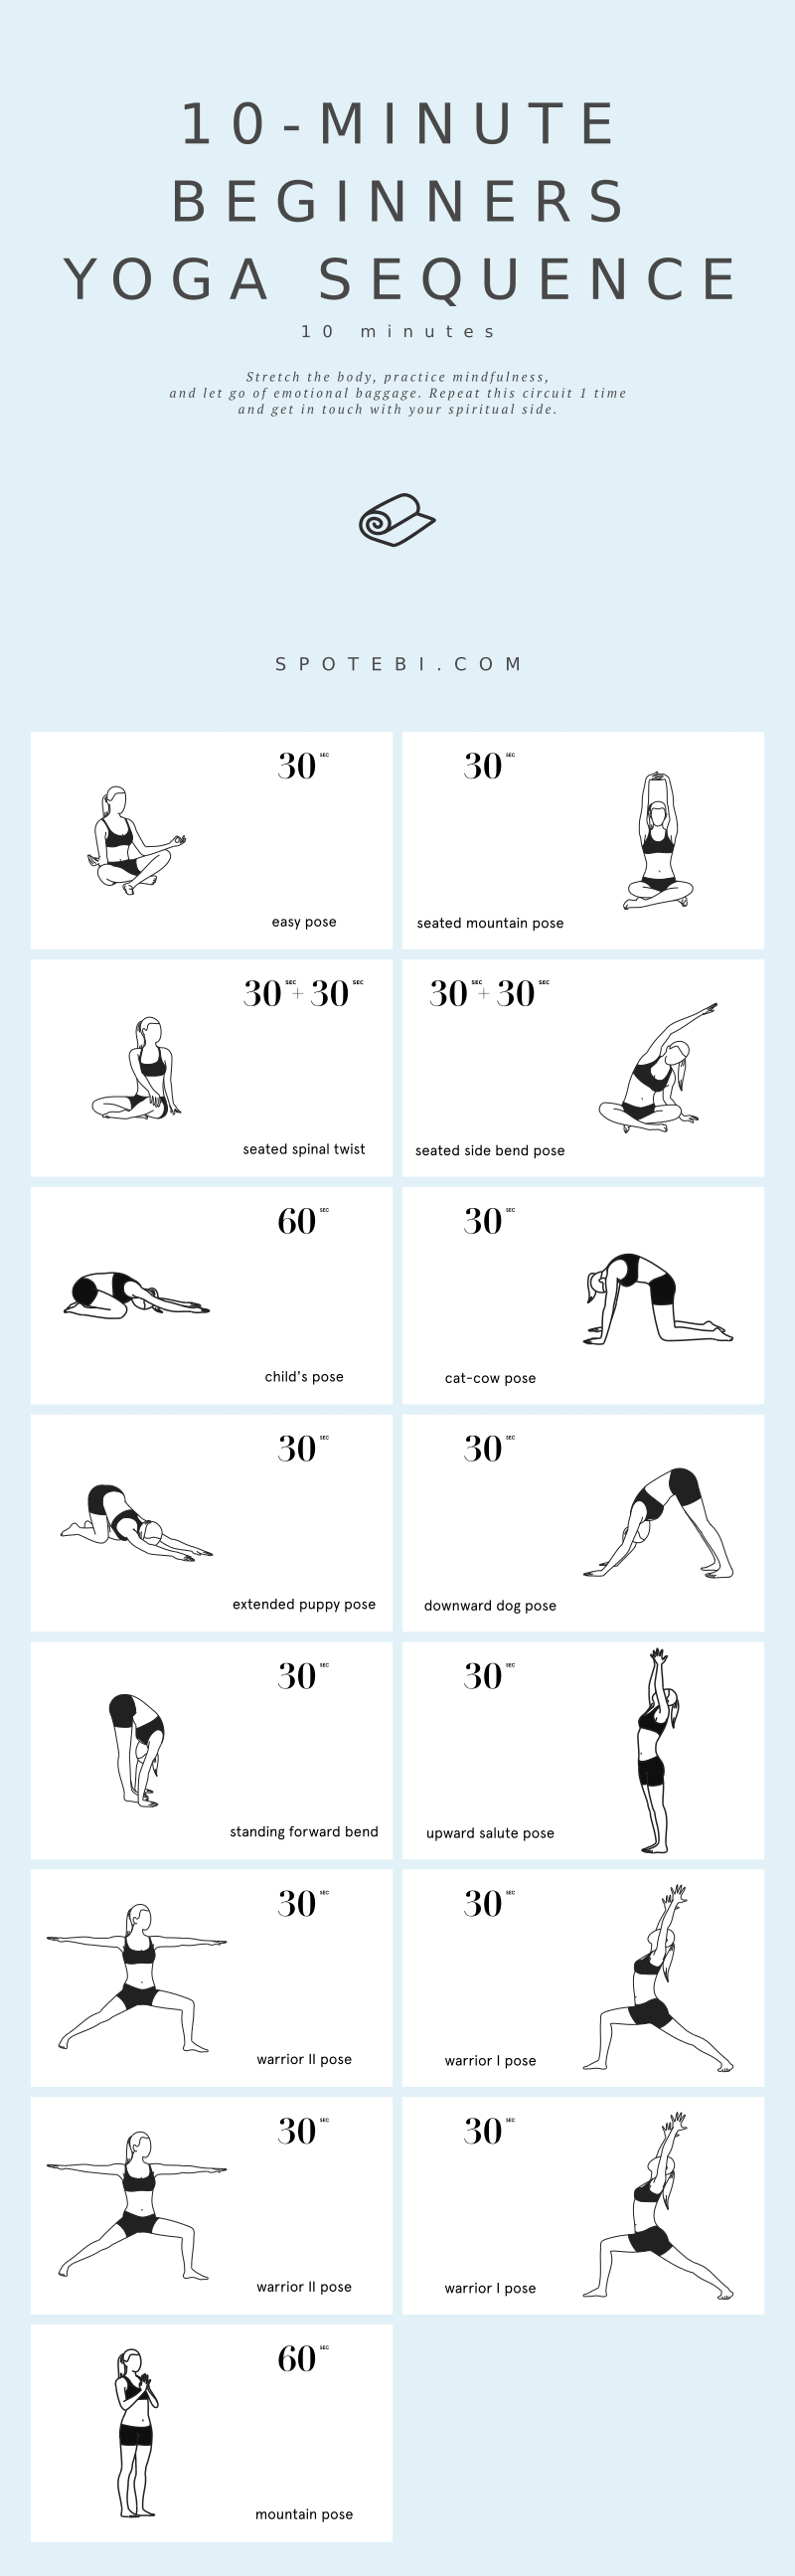 Are you new to yoga? This beginners yoga sequence is perfect to help you achieve more flexibility and get in touch with your spiritual side! https://www.spotebi.com/10-minute-beginners-yoga/